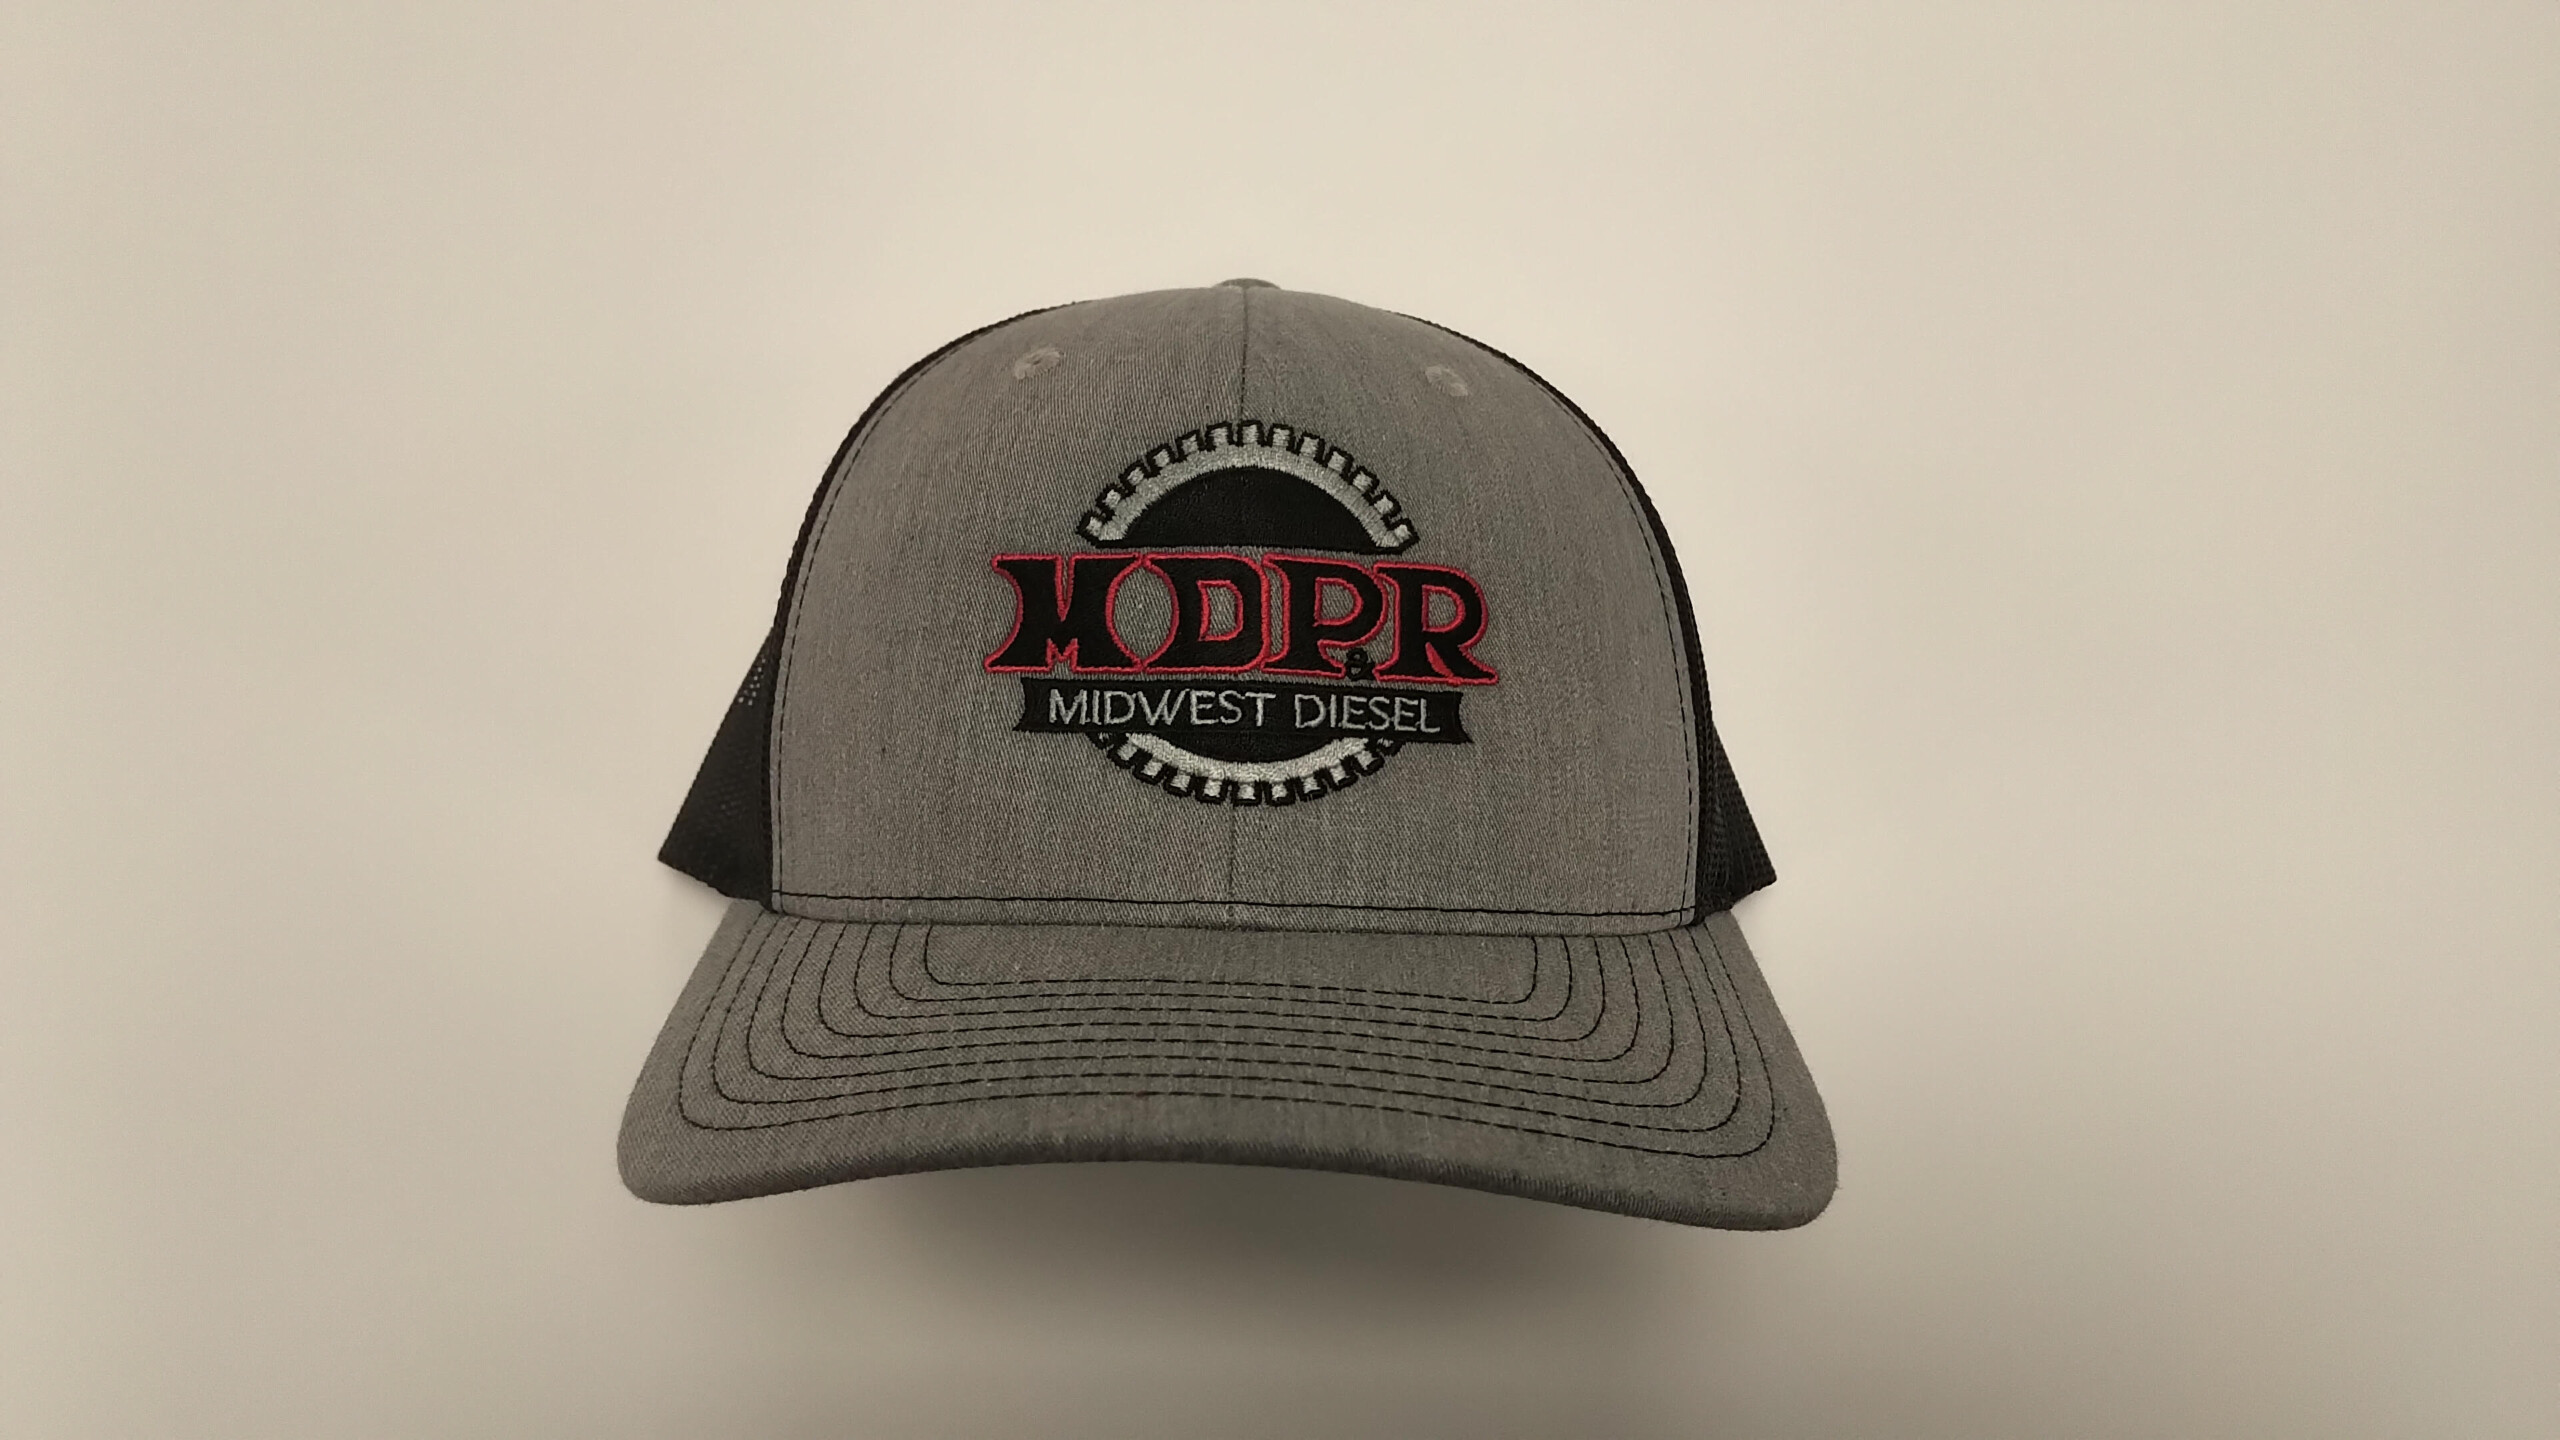 Your logo on your hat!